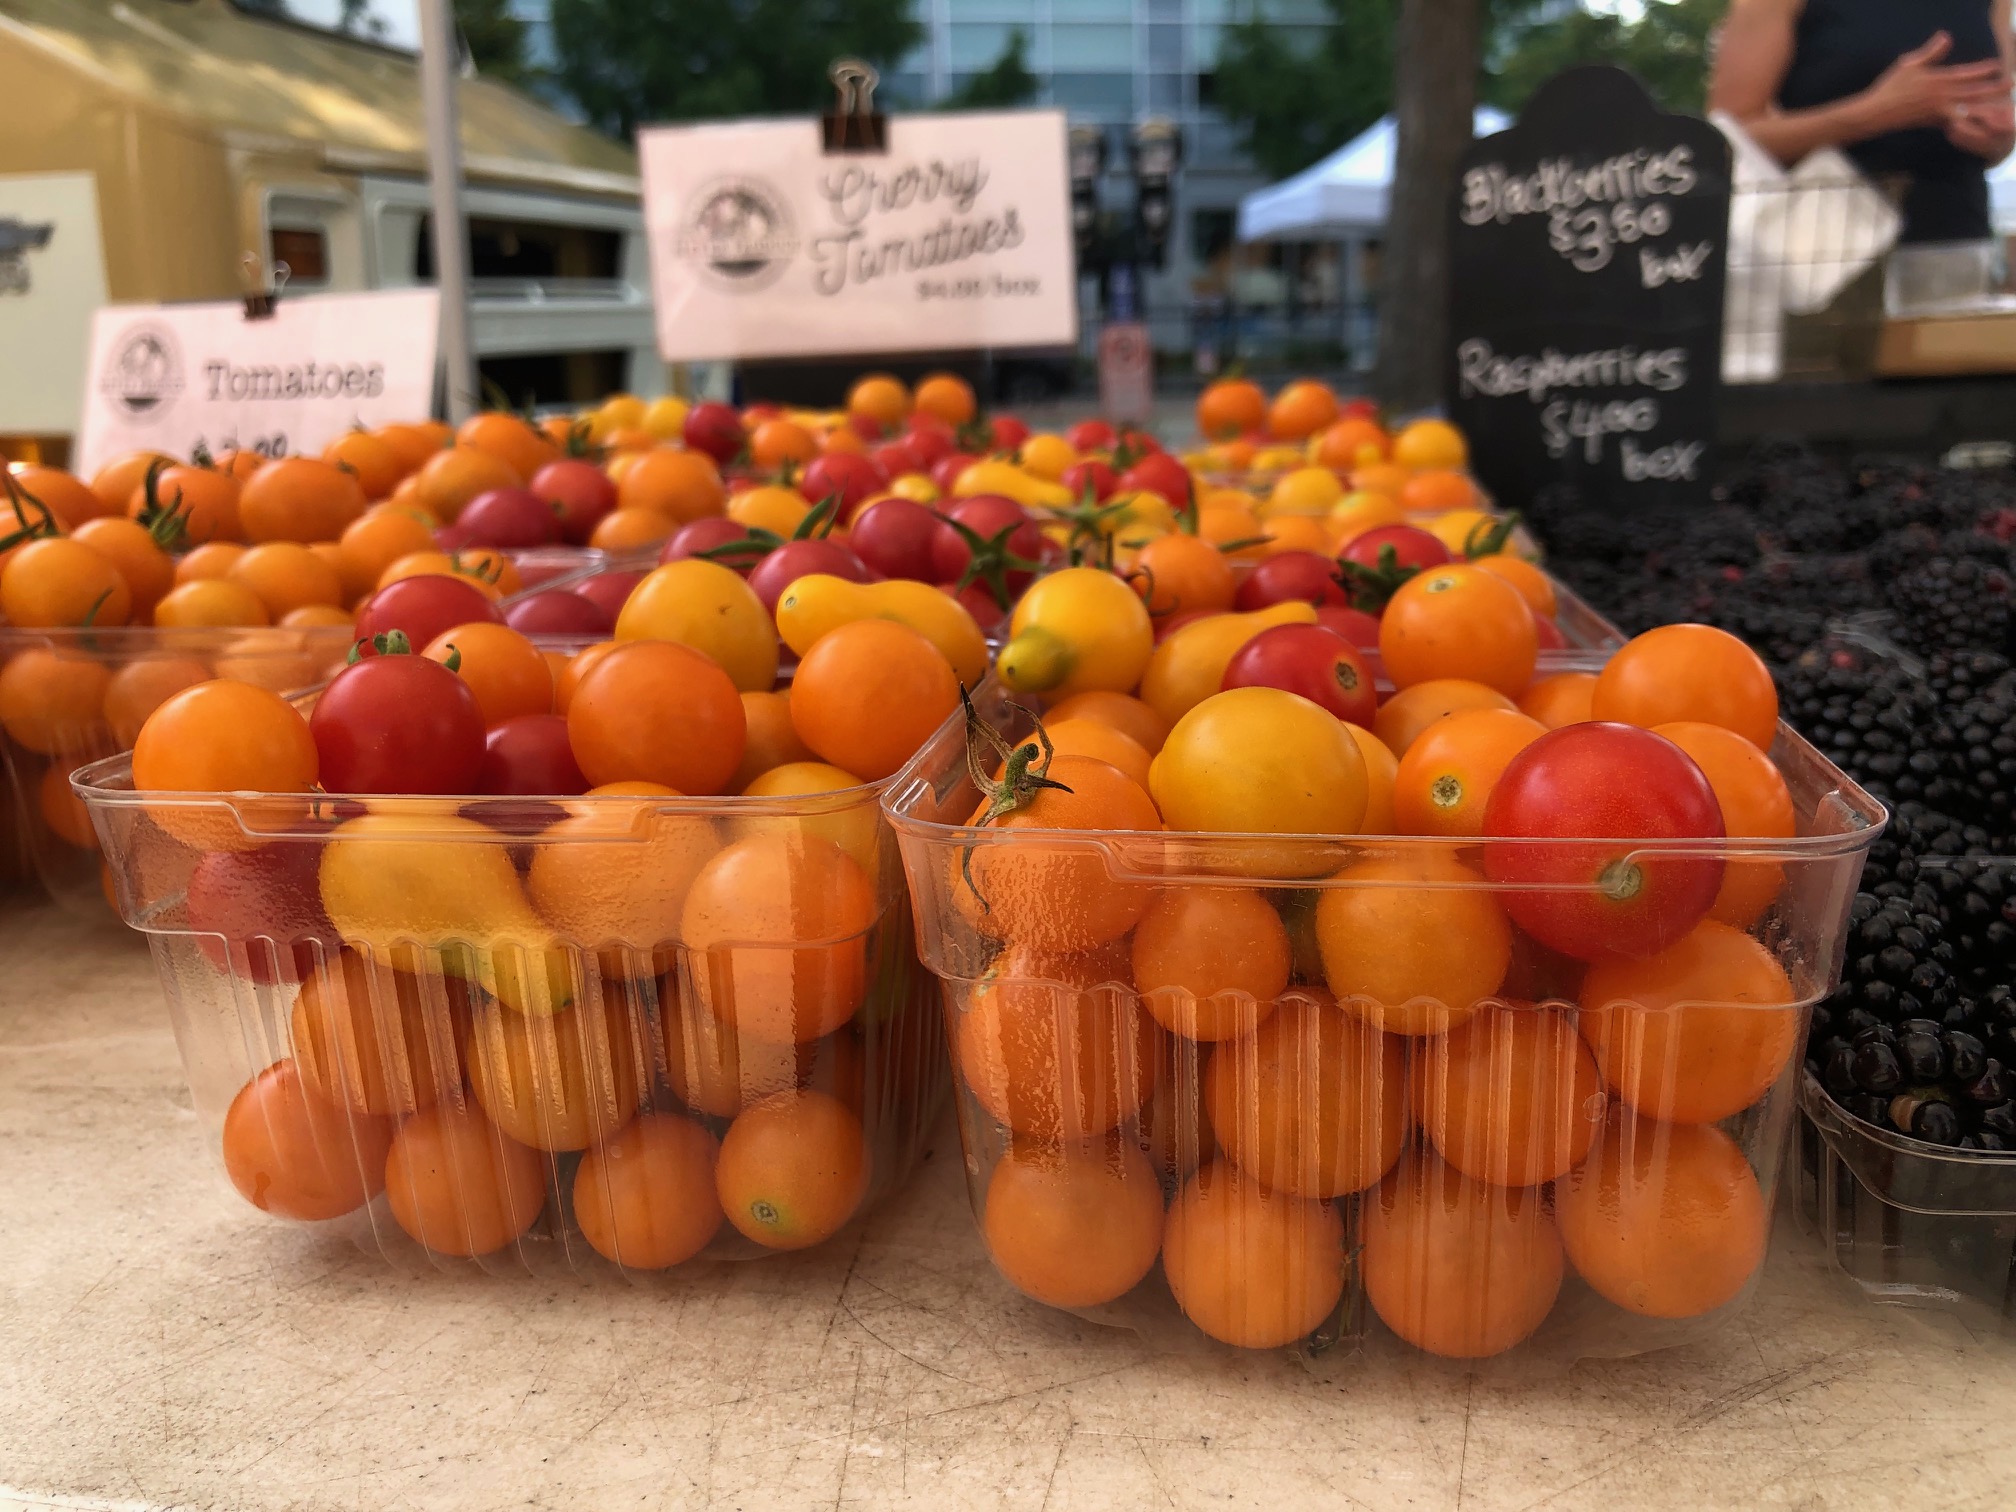 Many square, clear plastic containers contain cherry tomatoes of orange and red colors. Photo by Alyssa Buckley.